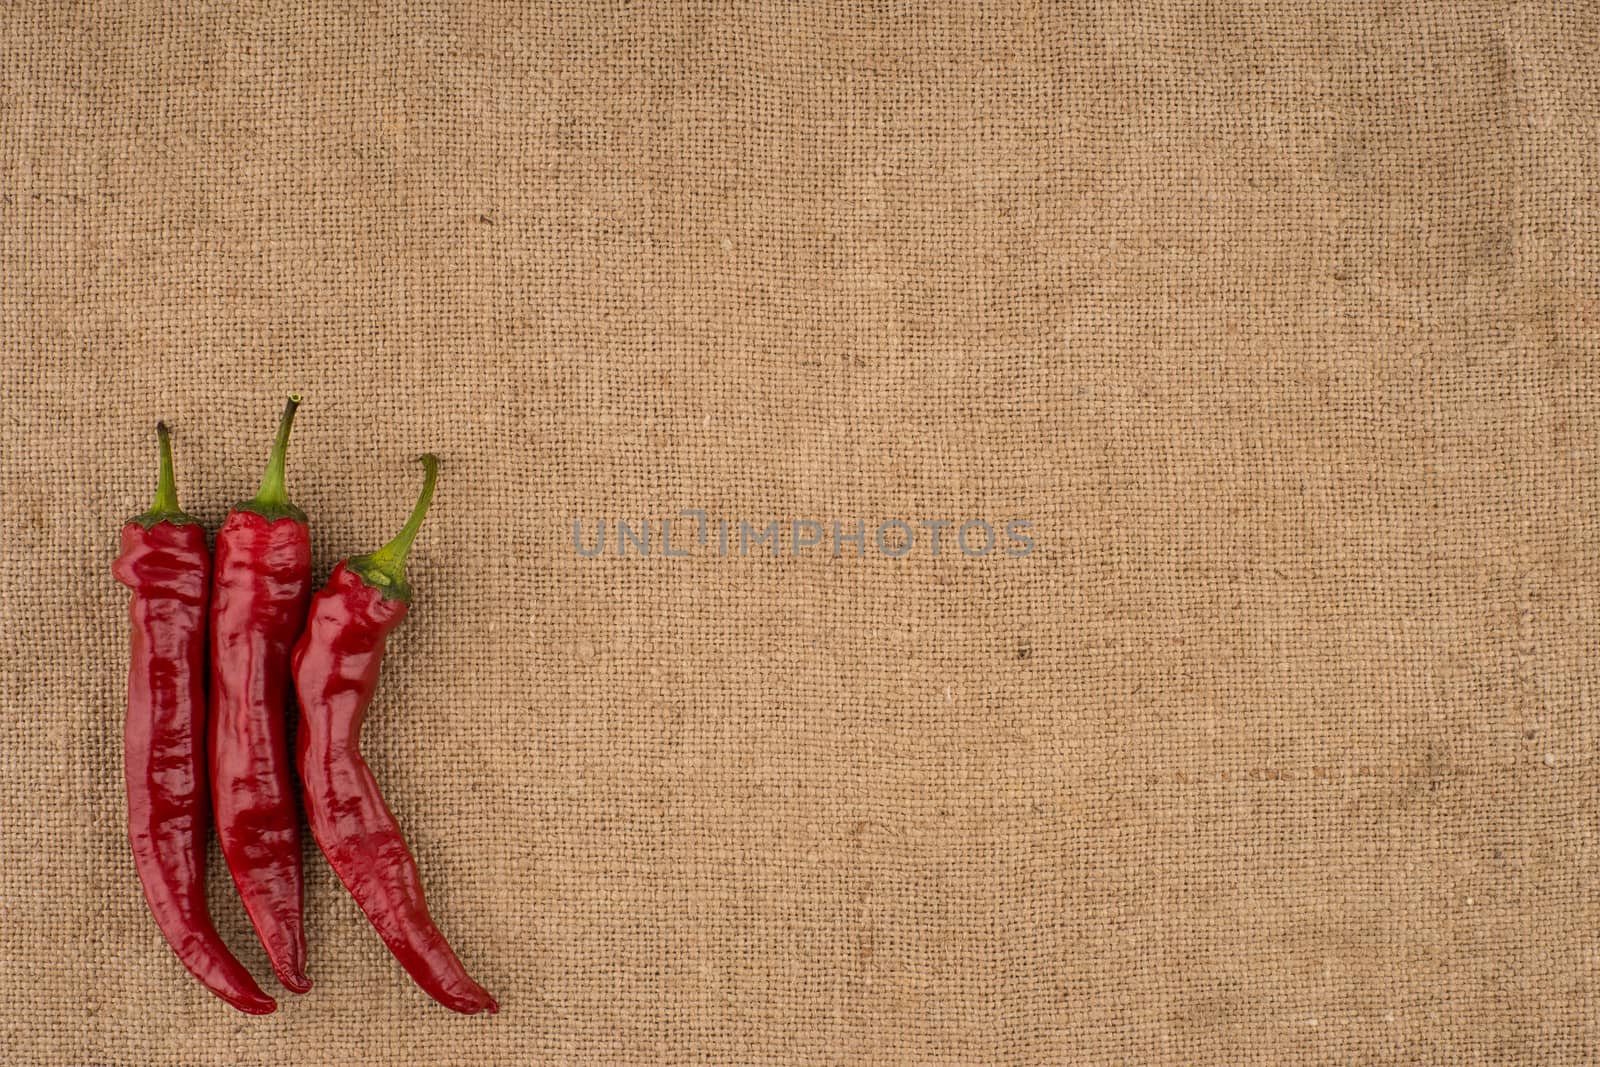 Red chili on burlap. Top view.